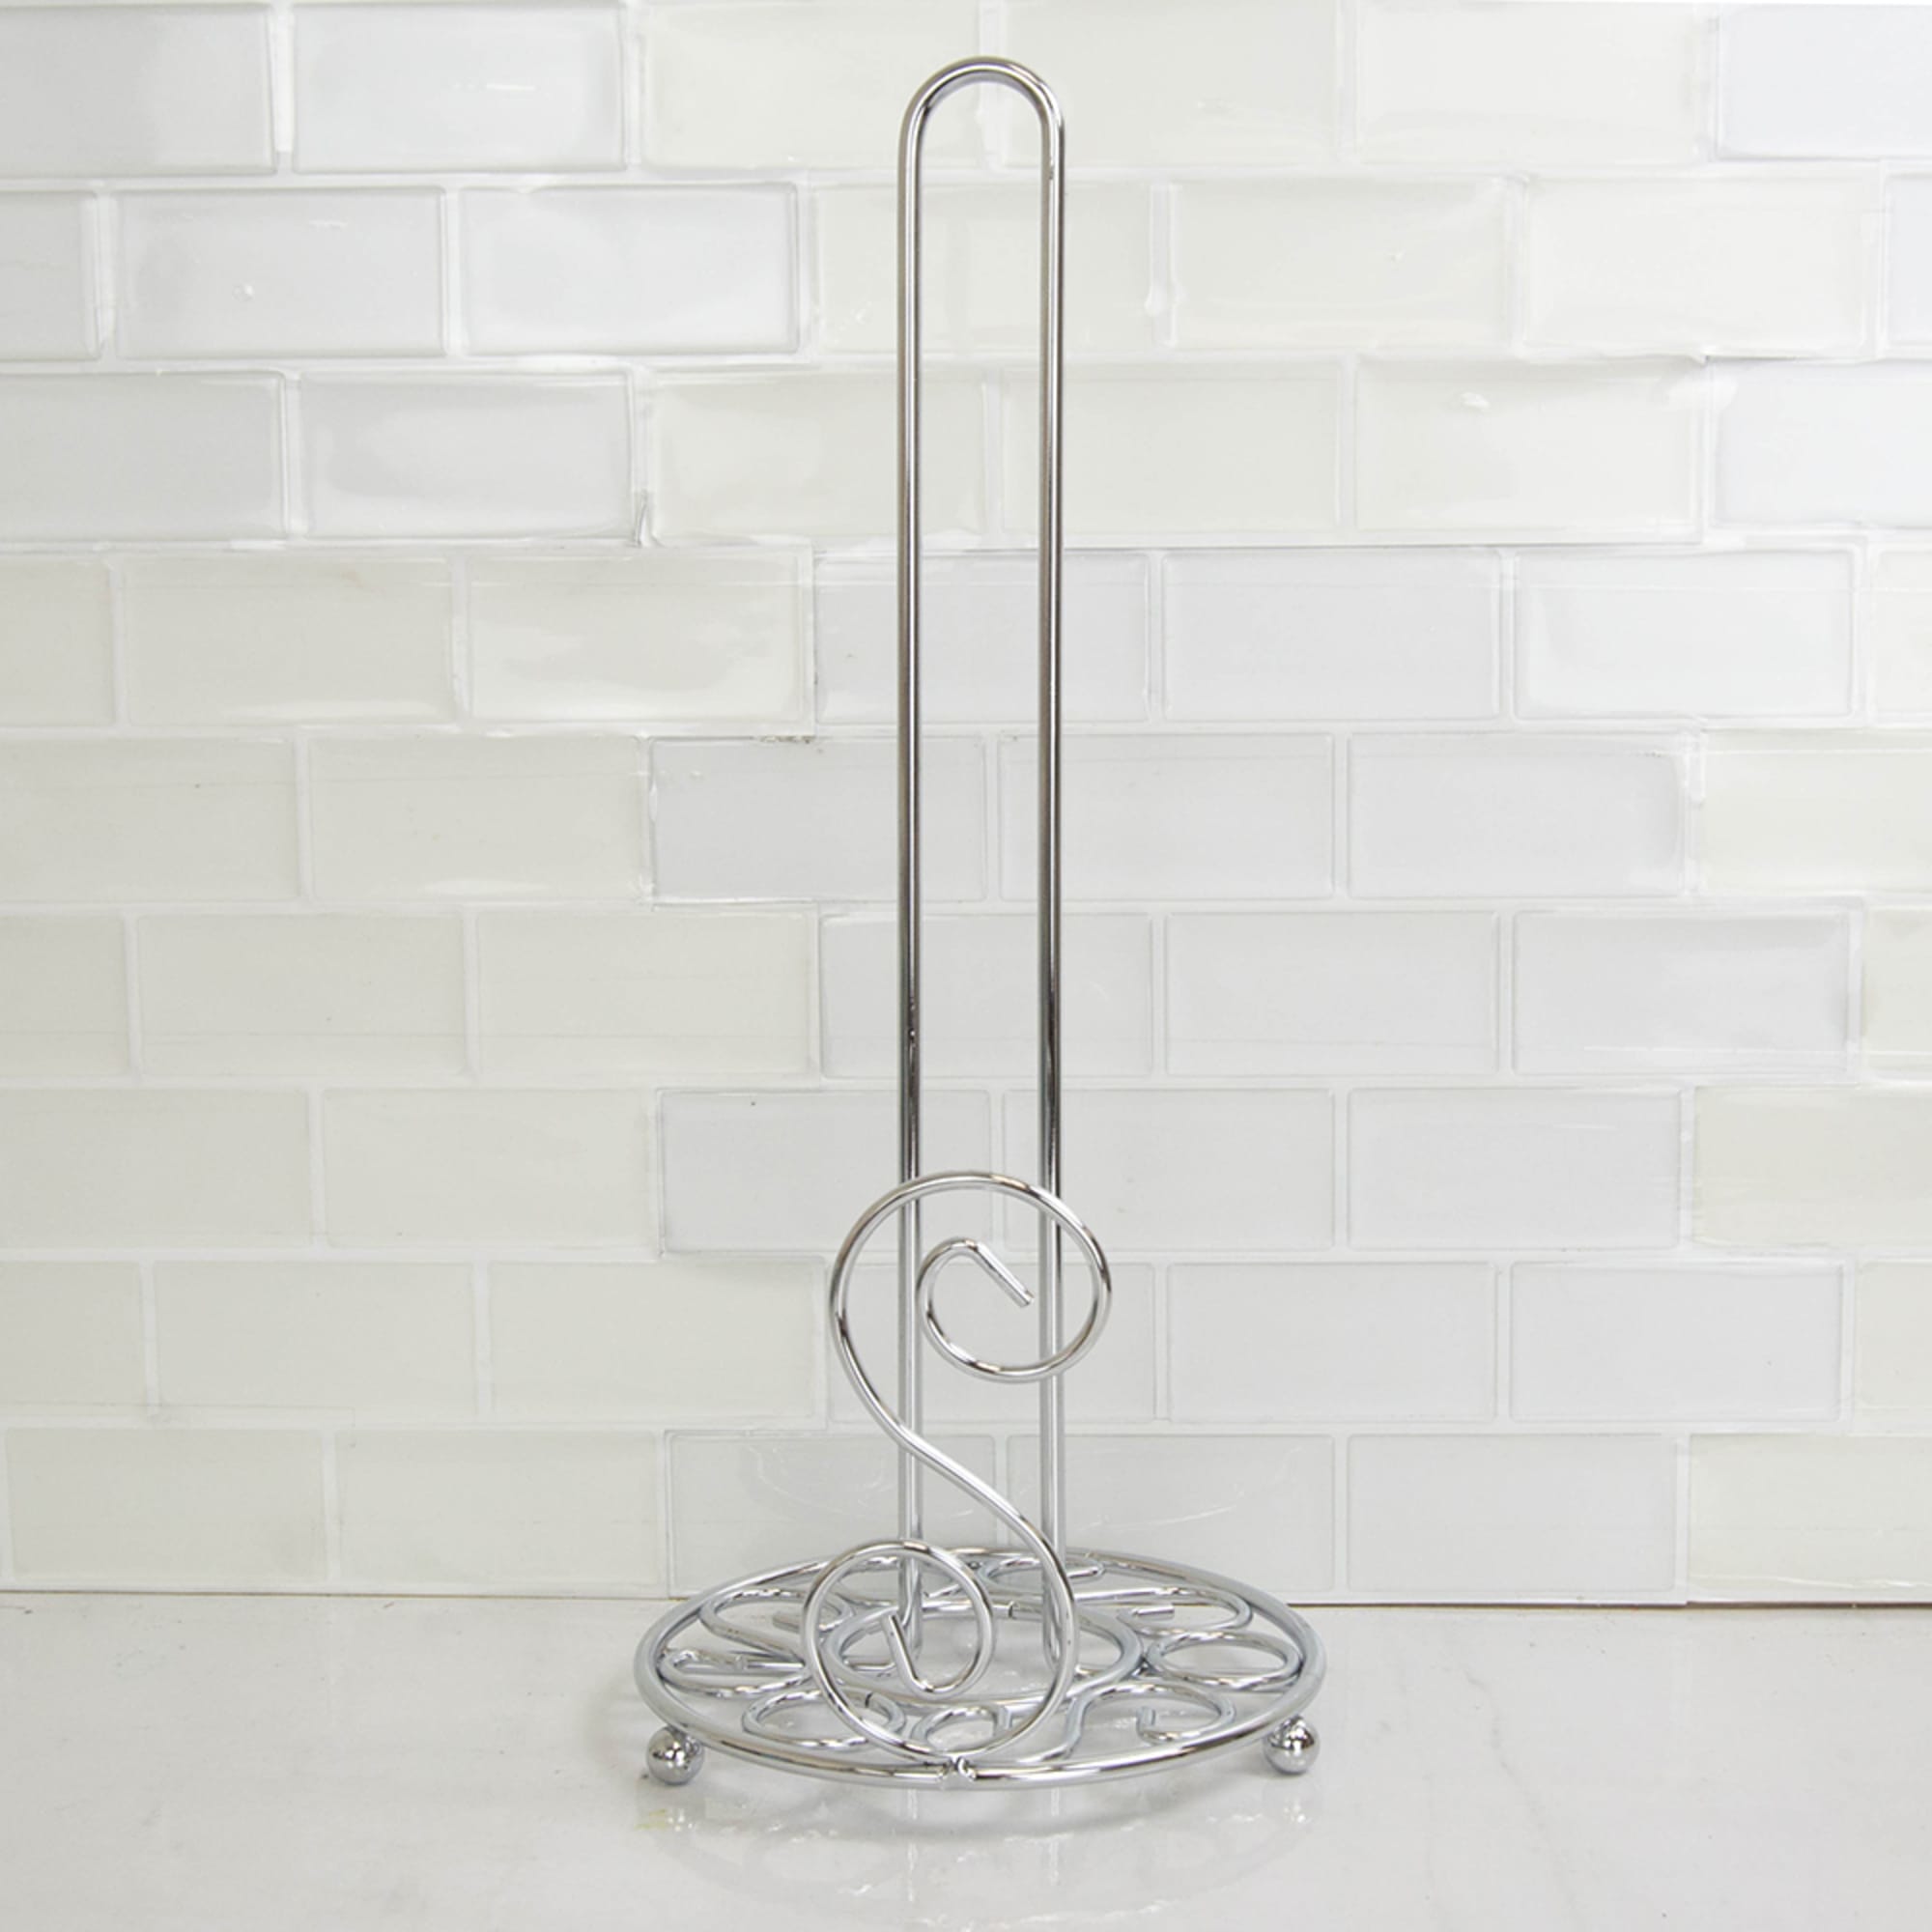 Home Basics Scroll Collection Free-Standing Paper Towel Holder, Chrome $5.00 EACH, CASE PACK OF 12